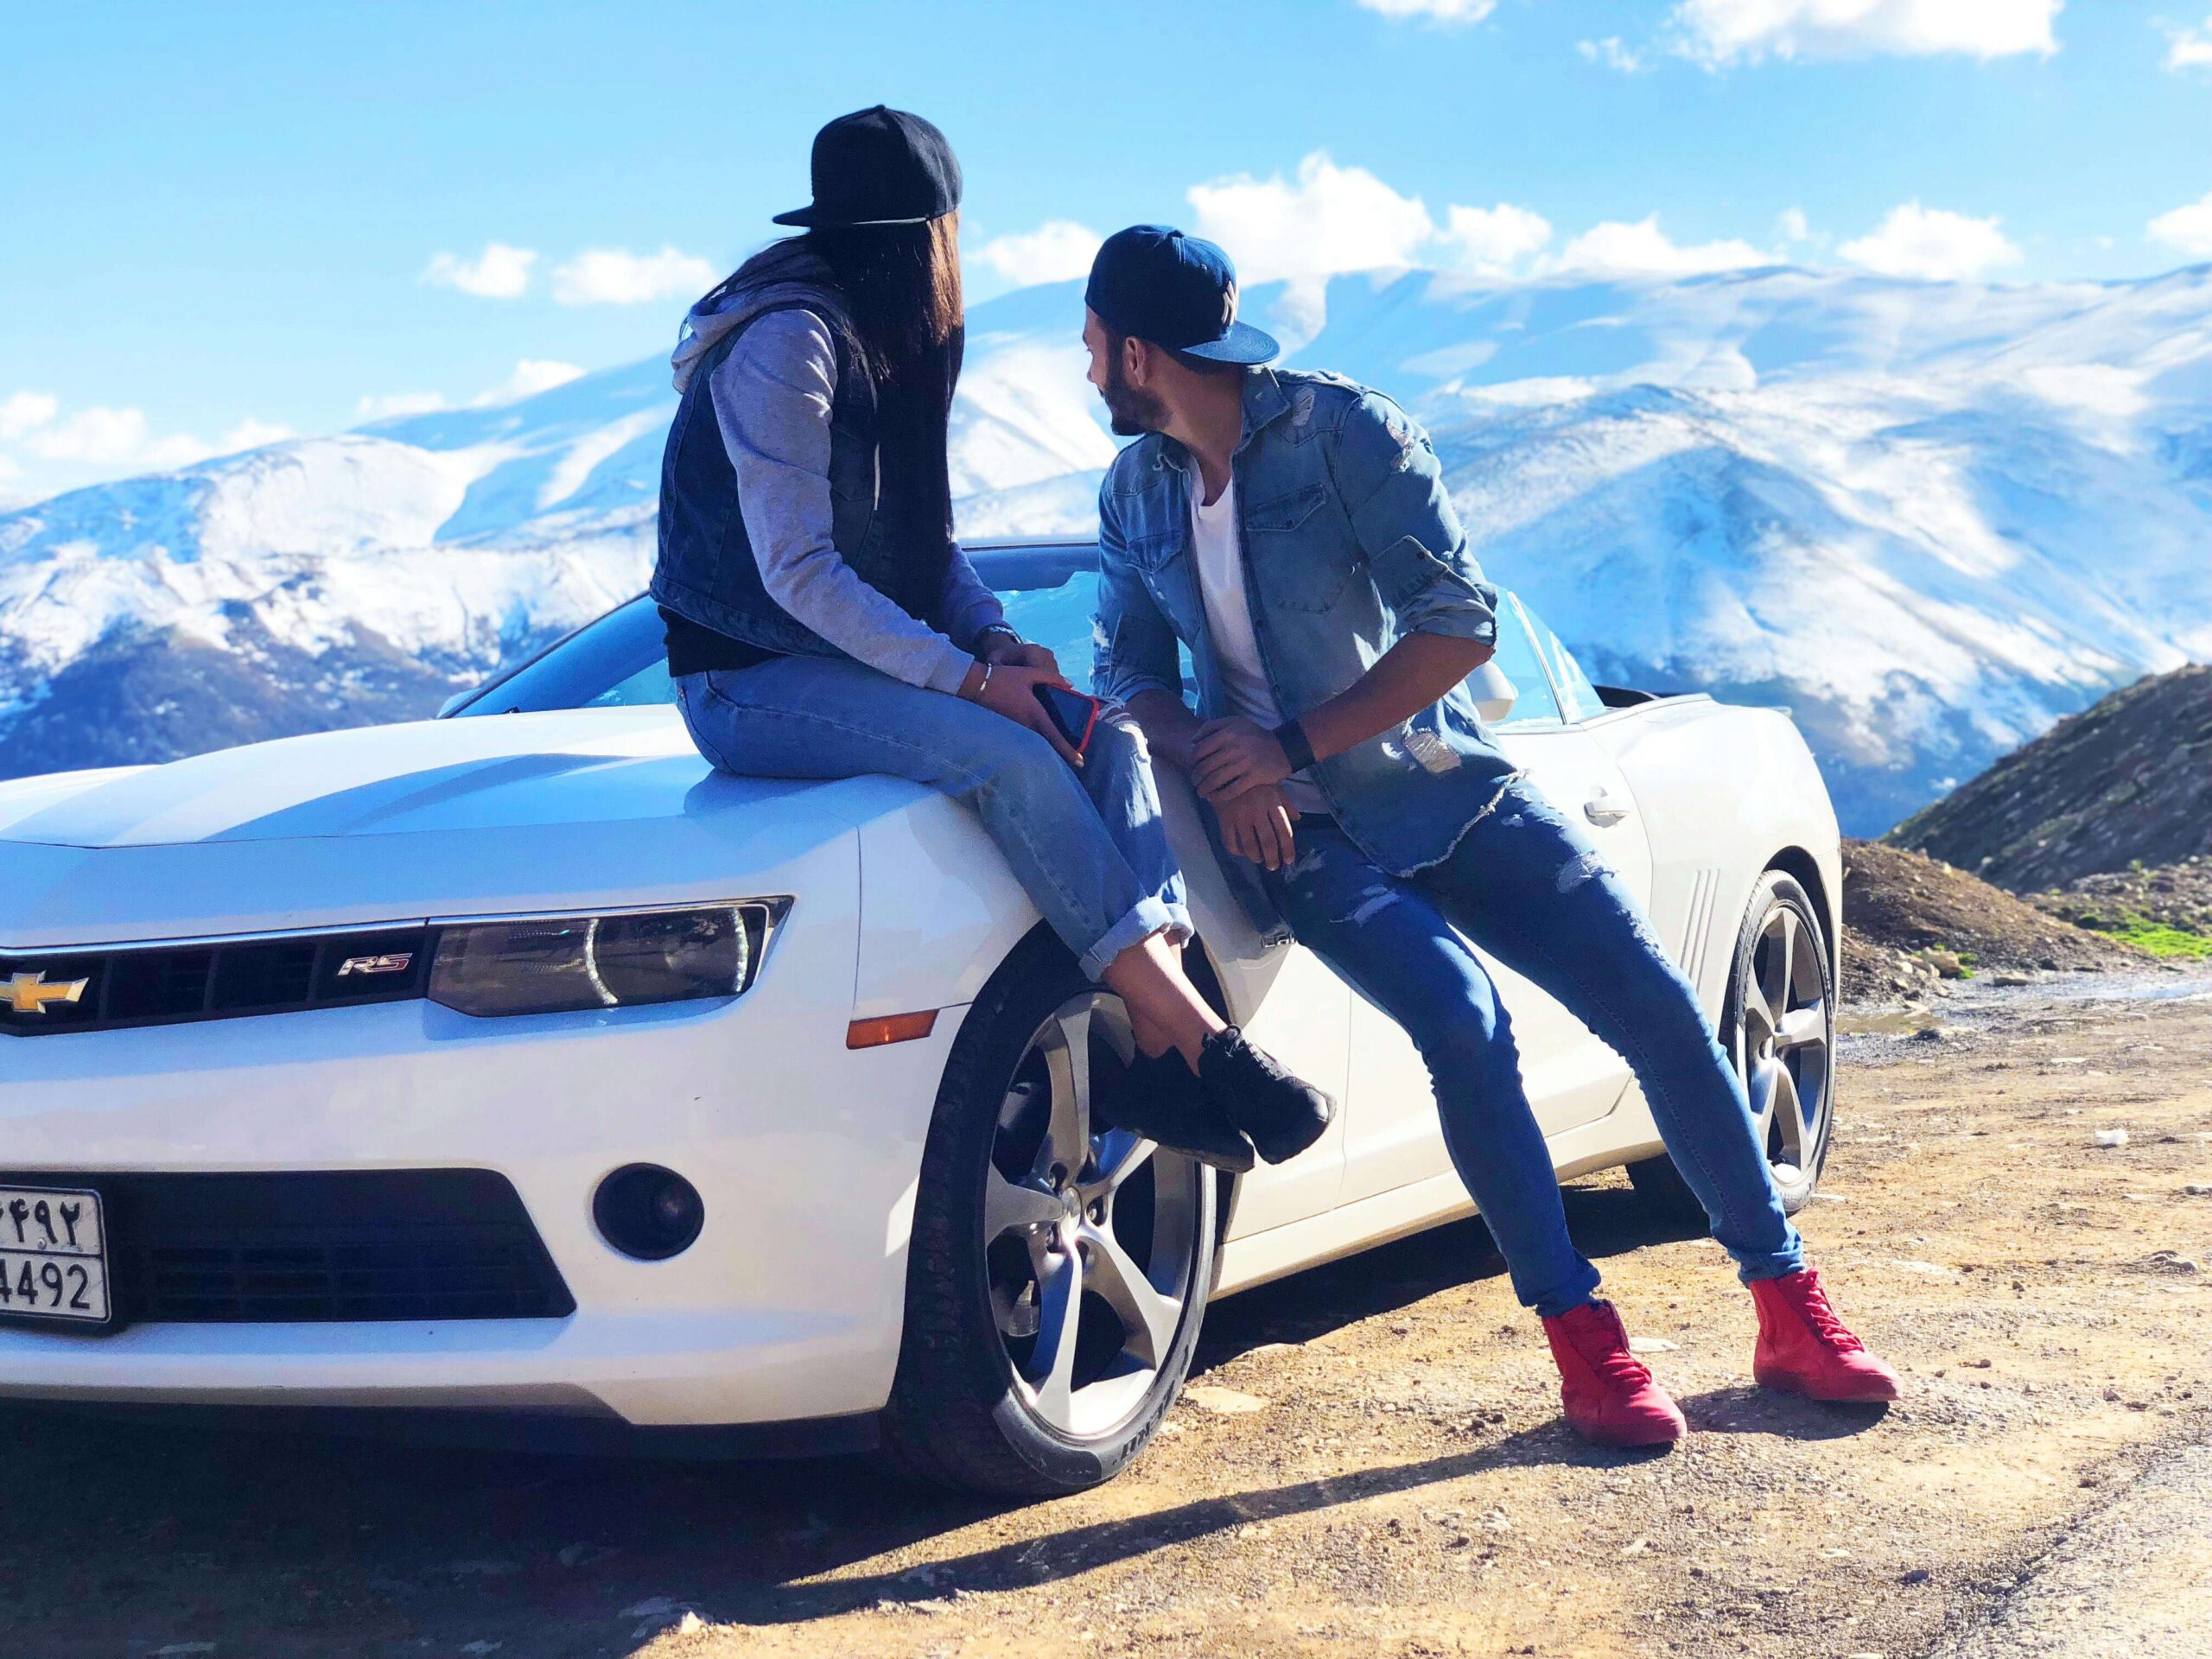 A couple enjoying a moment on the hood of their white convertible car with snow-capped mountains in the background